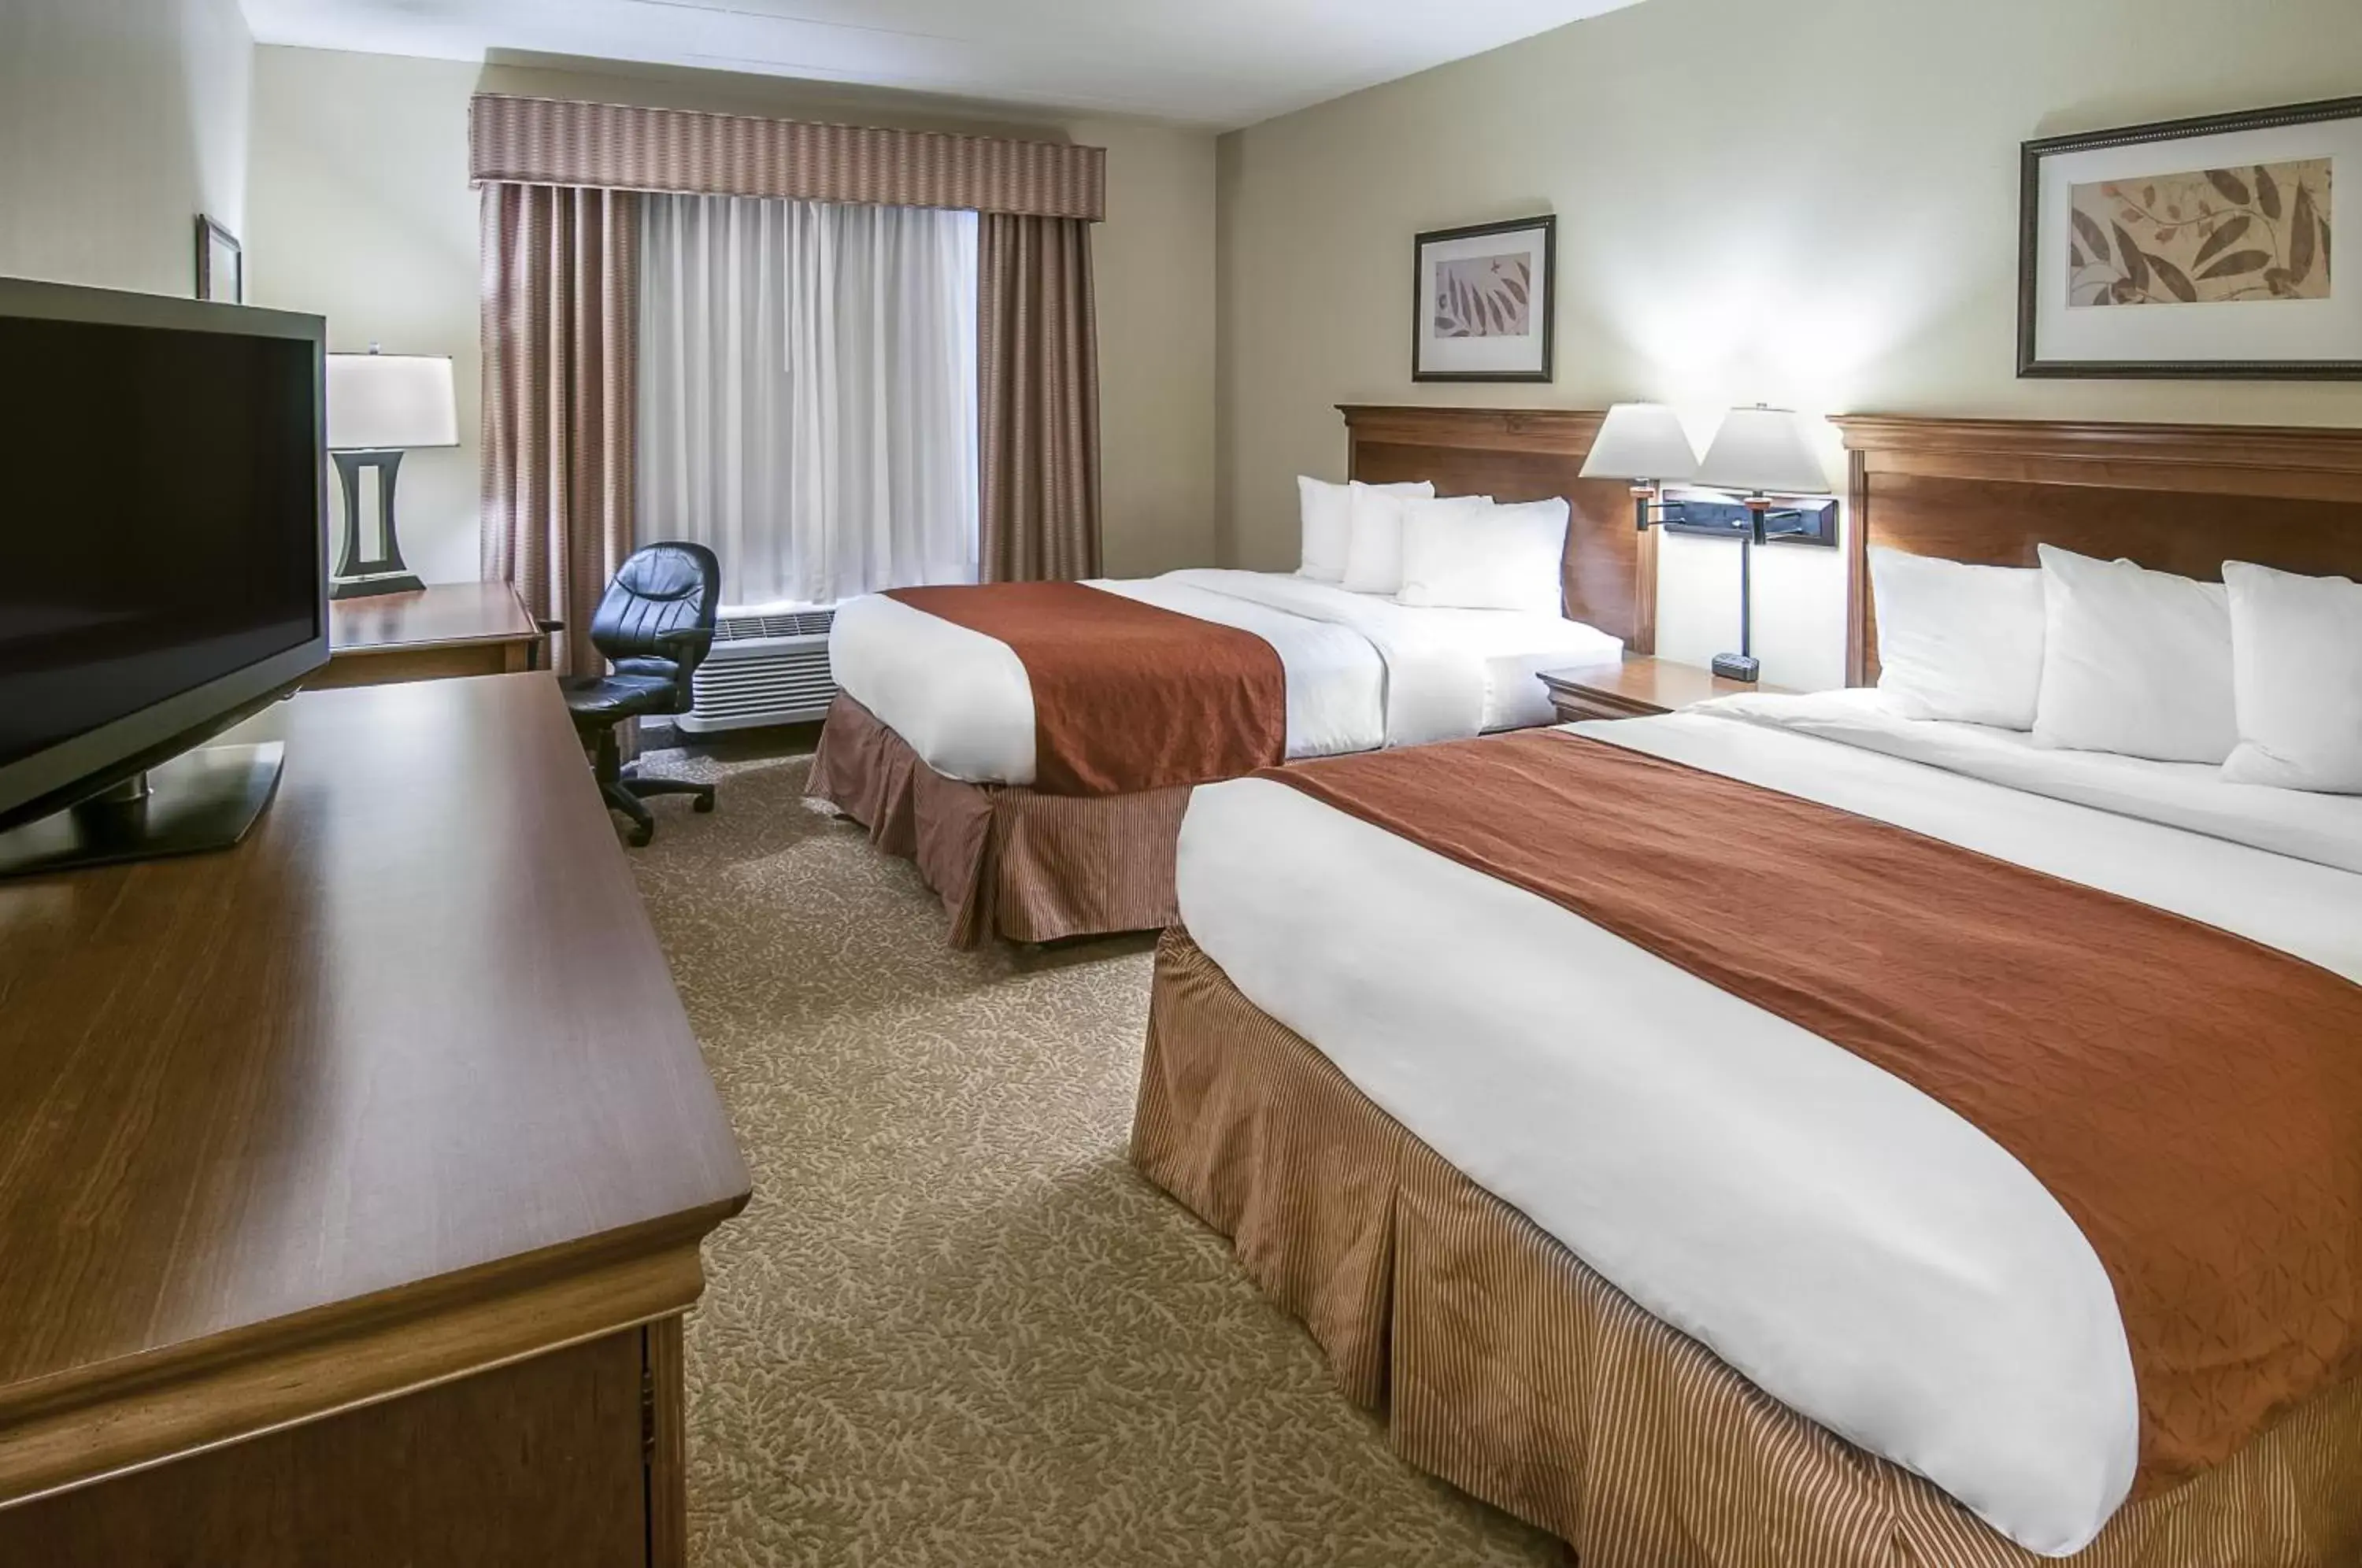 Queen Room with Two Queen Beds - Non-Smoking in Country Inn & Suites by Radisson, Rapid City, SD